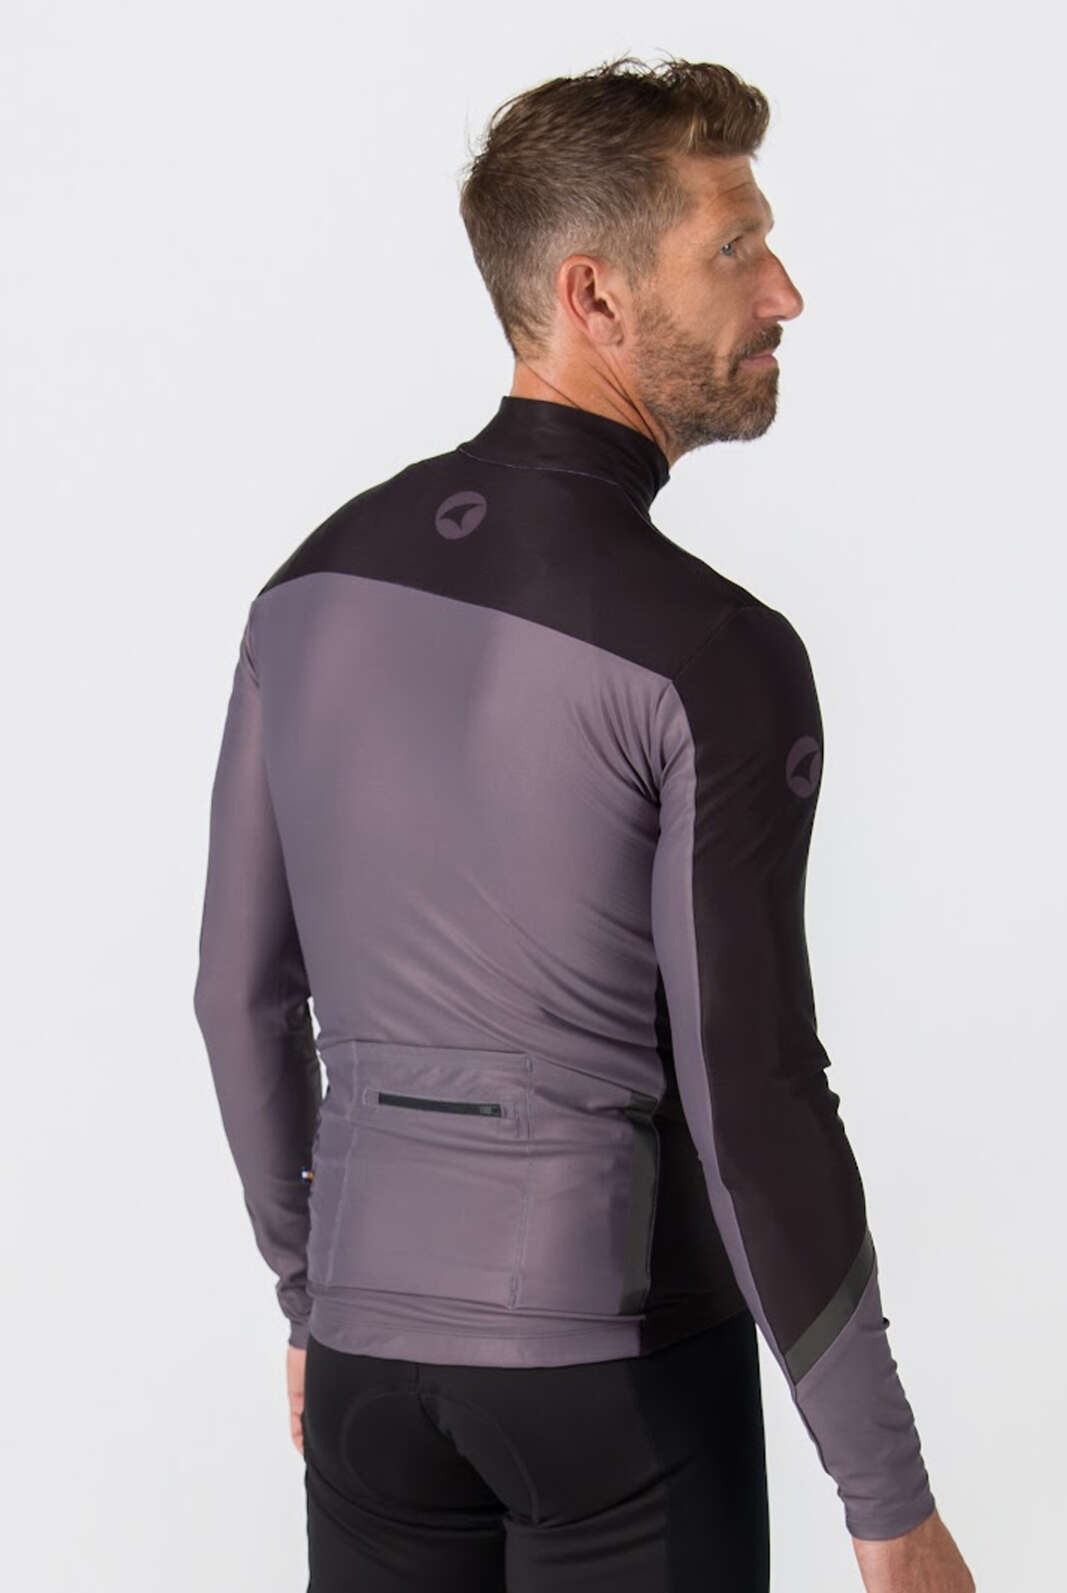 Men's Black Thermal Long Sleeve Cycling Jersey - Back View